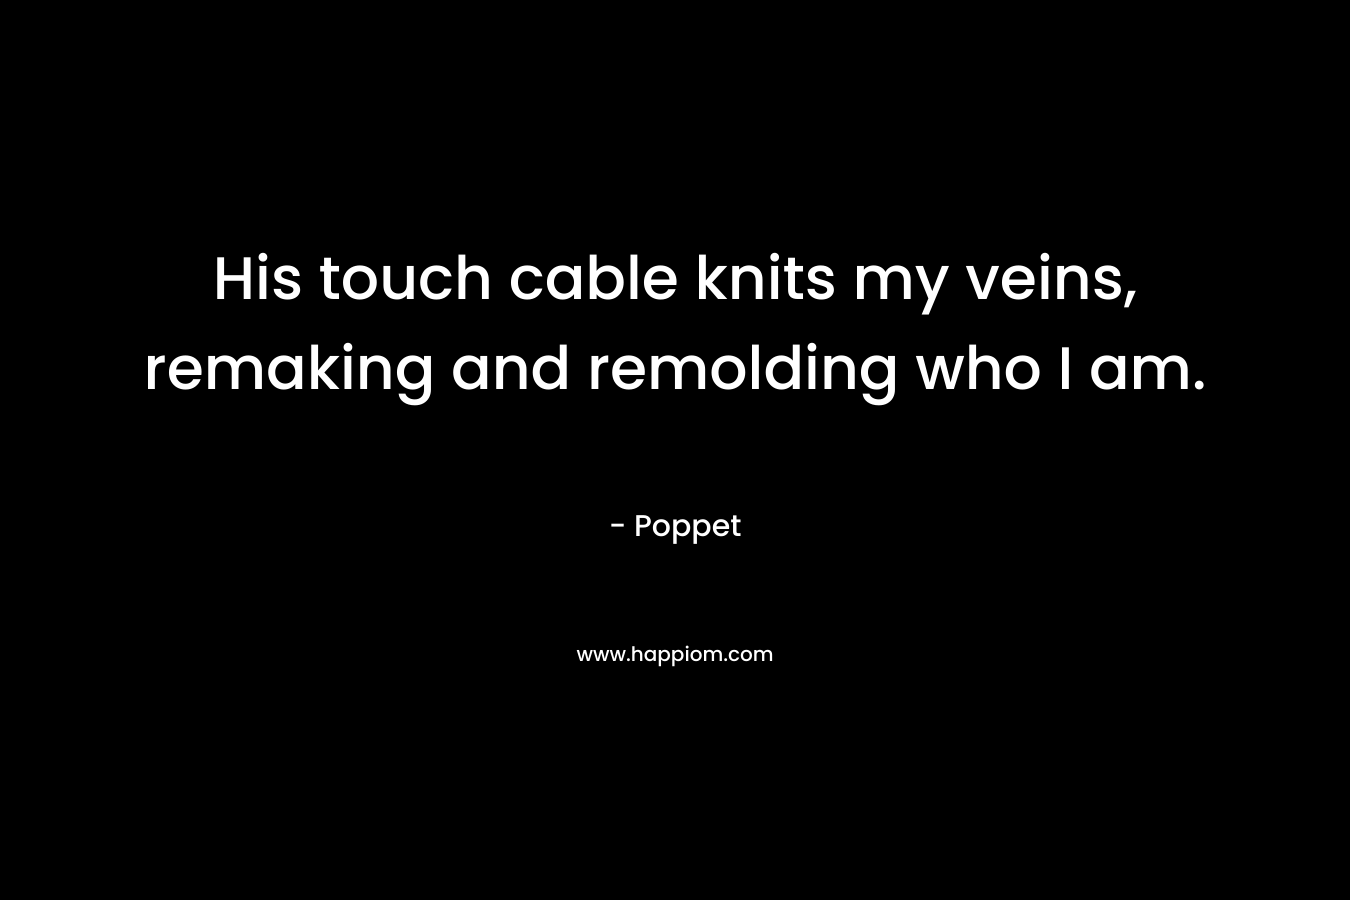 His touch cable knits my veins, remaking and remolding who I am. – Poppet